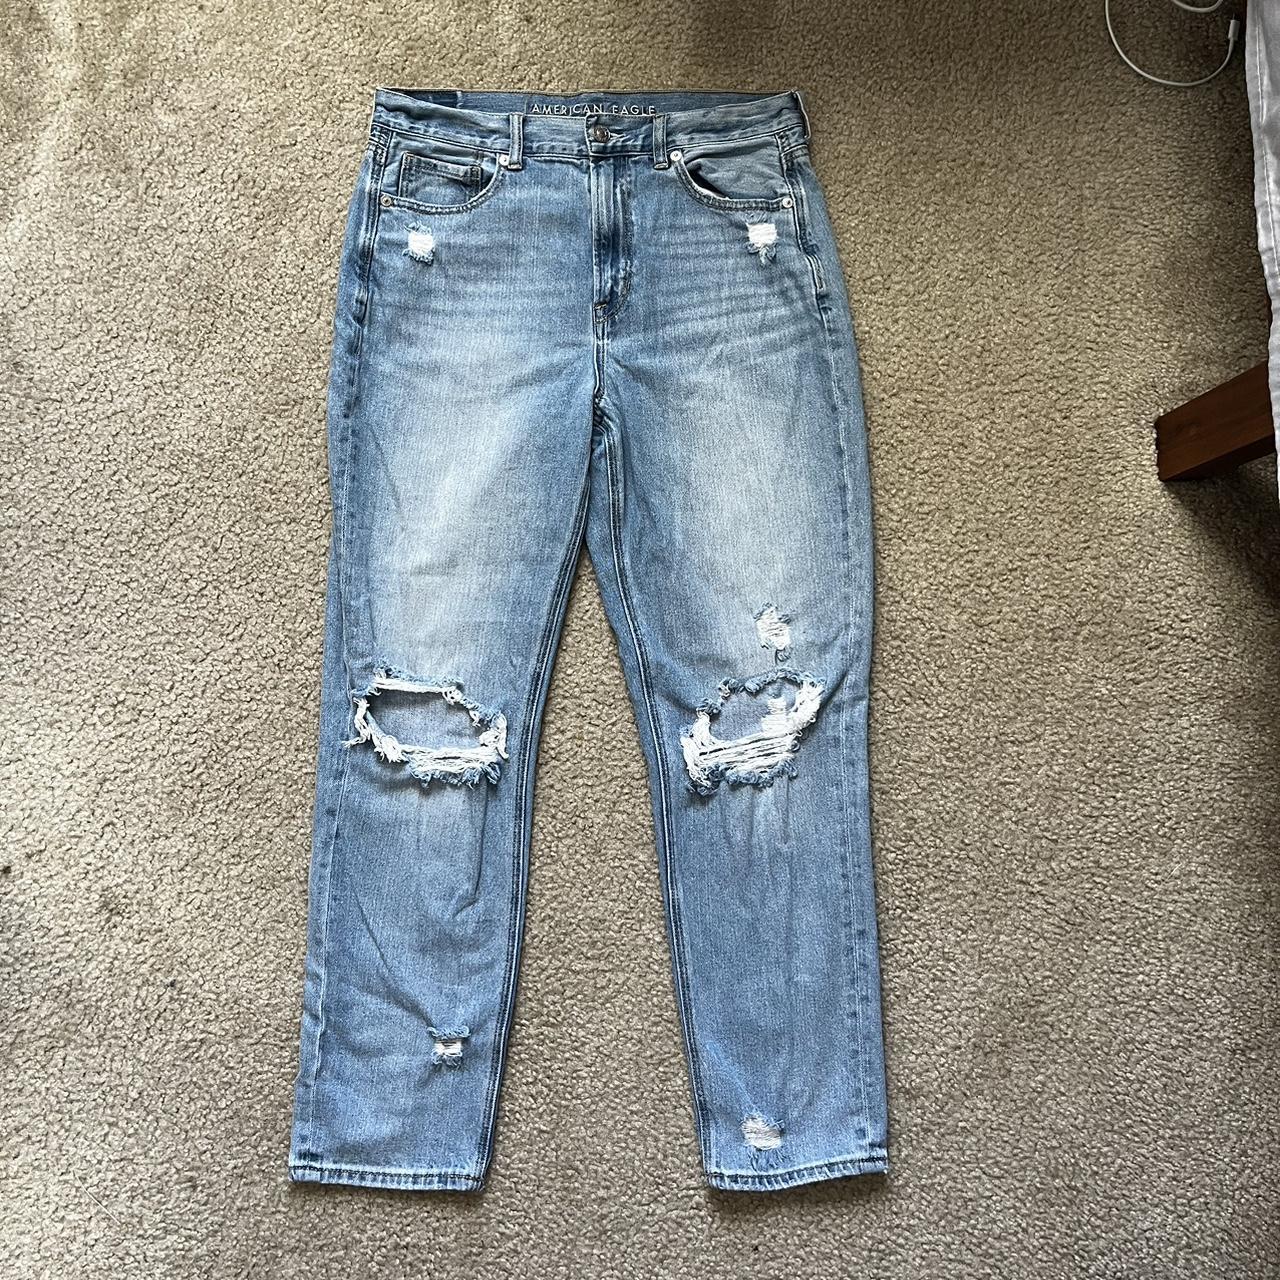 AMERICAN EAGLE CUTE RIPPED JEANS all rips came with... - Depop